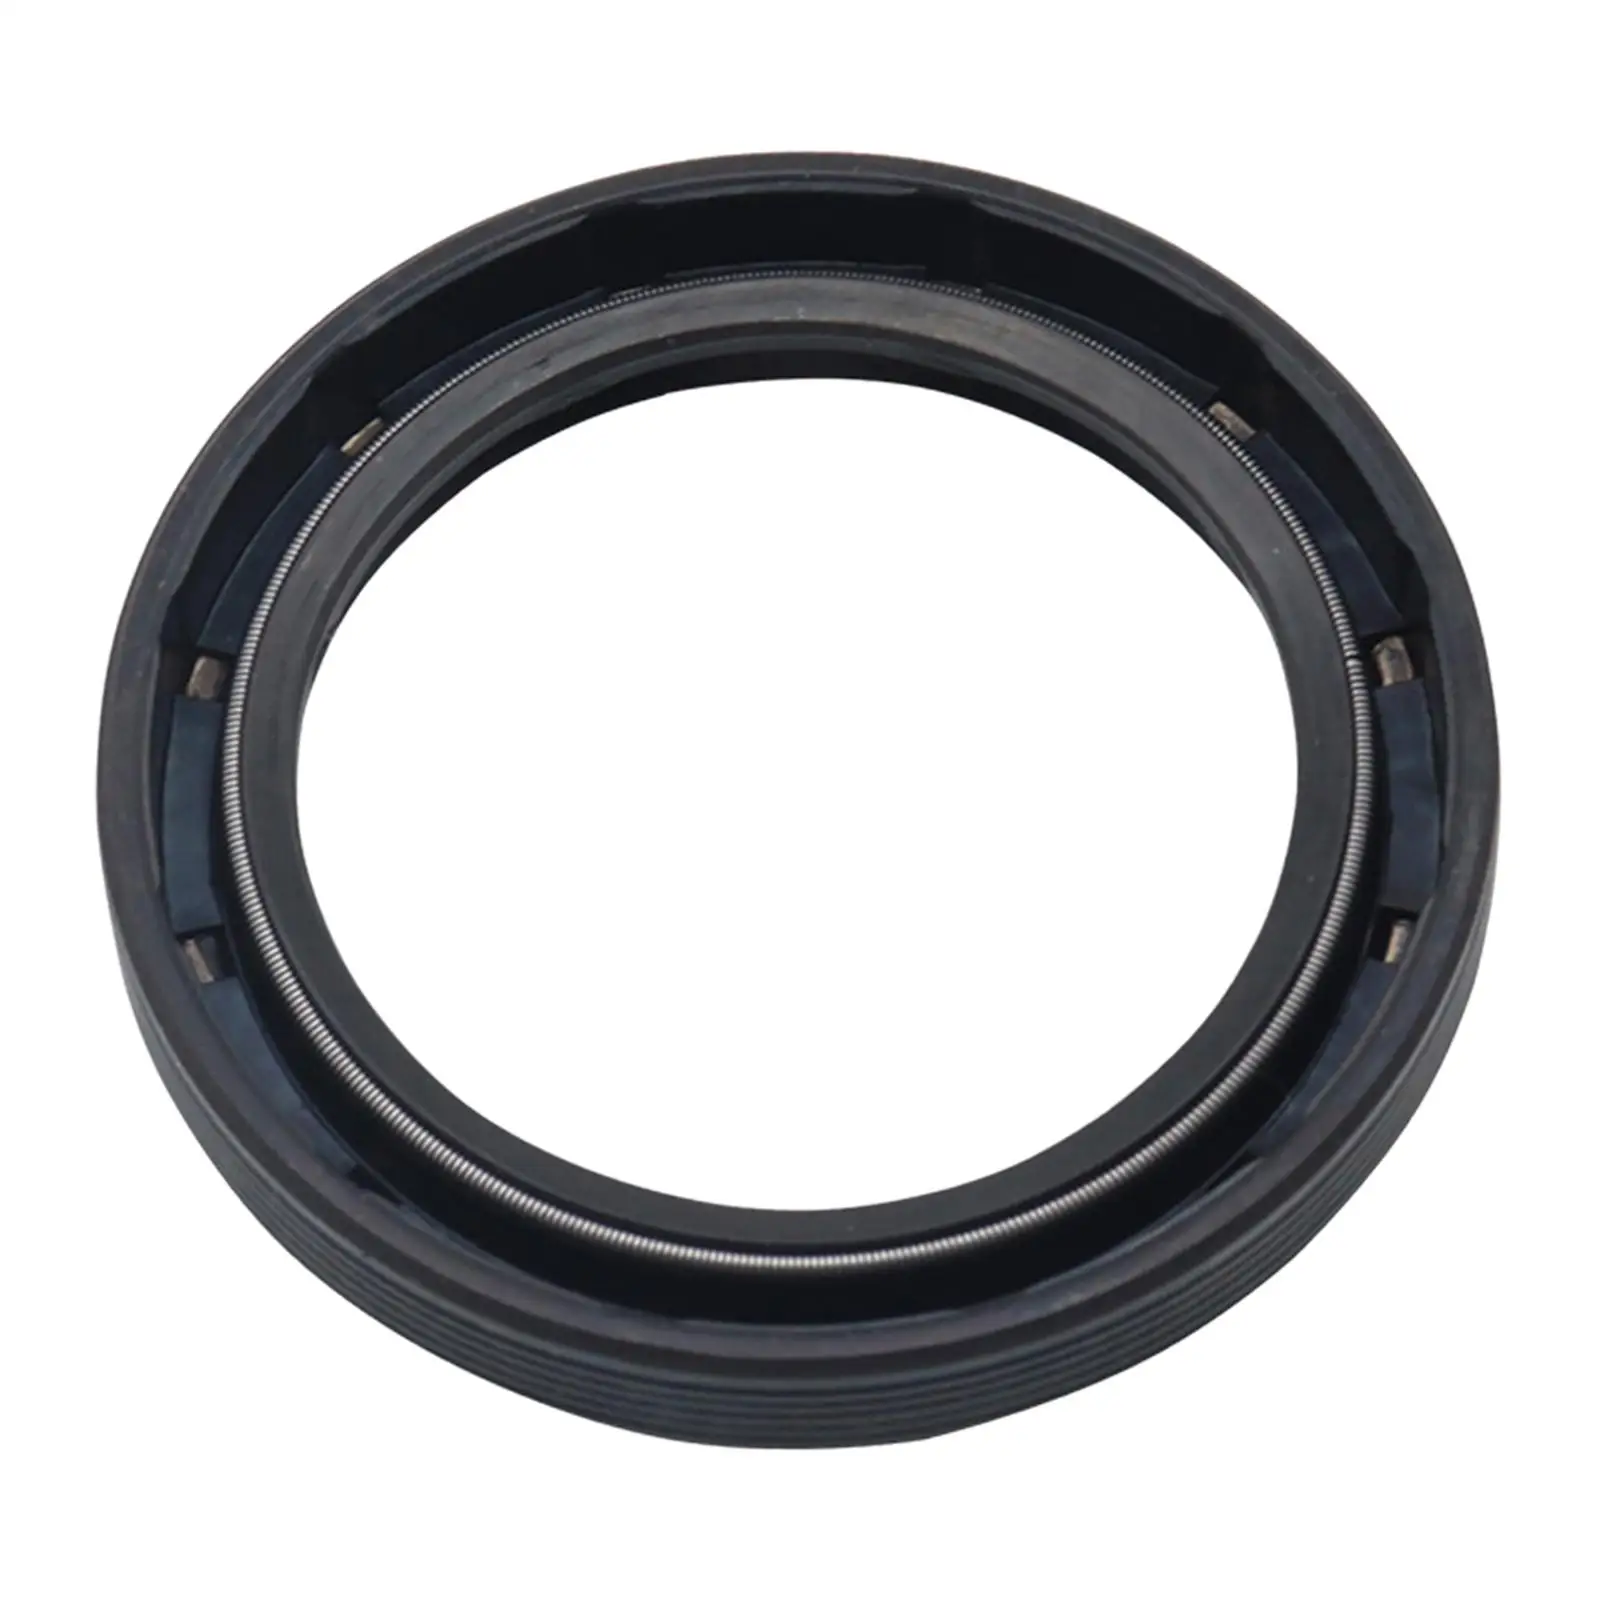 Transmission Front Oil Seal Half Shaft Oil Seal Replacement Bearings Seals 01T/01J/01N A4 A6 A8 Automotive  for 